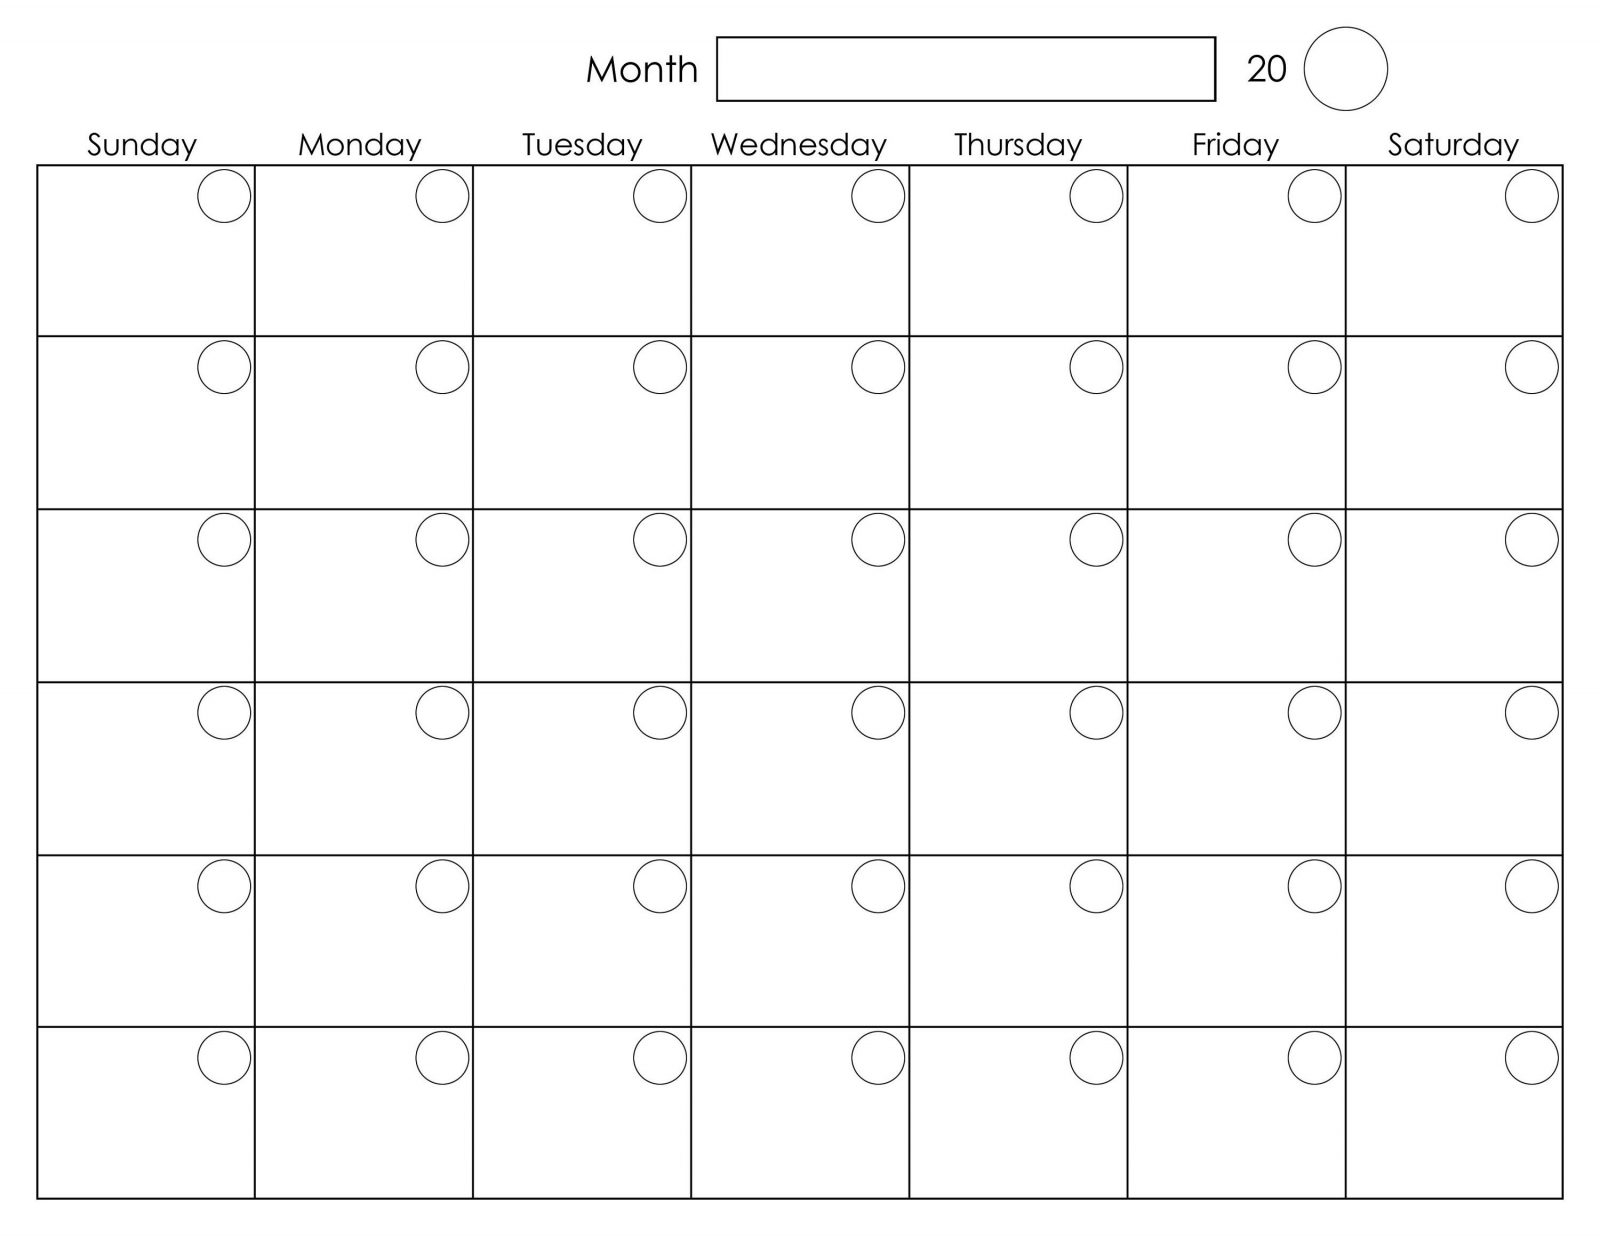 Monday To Friday Monthly Calendar Template | Monthly